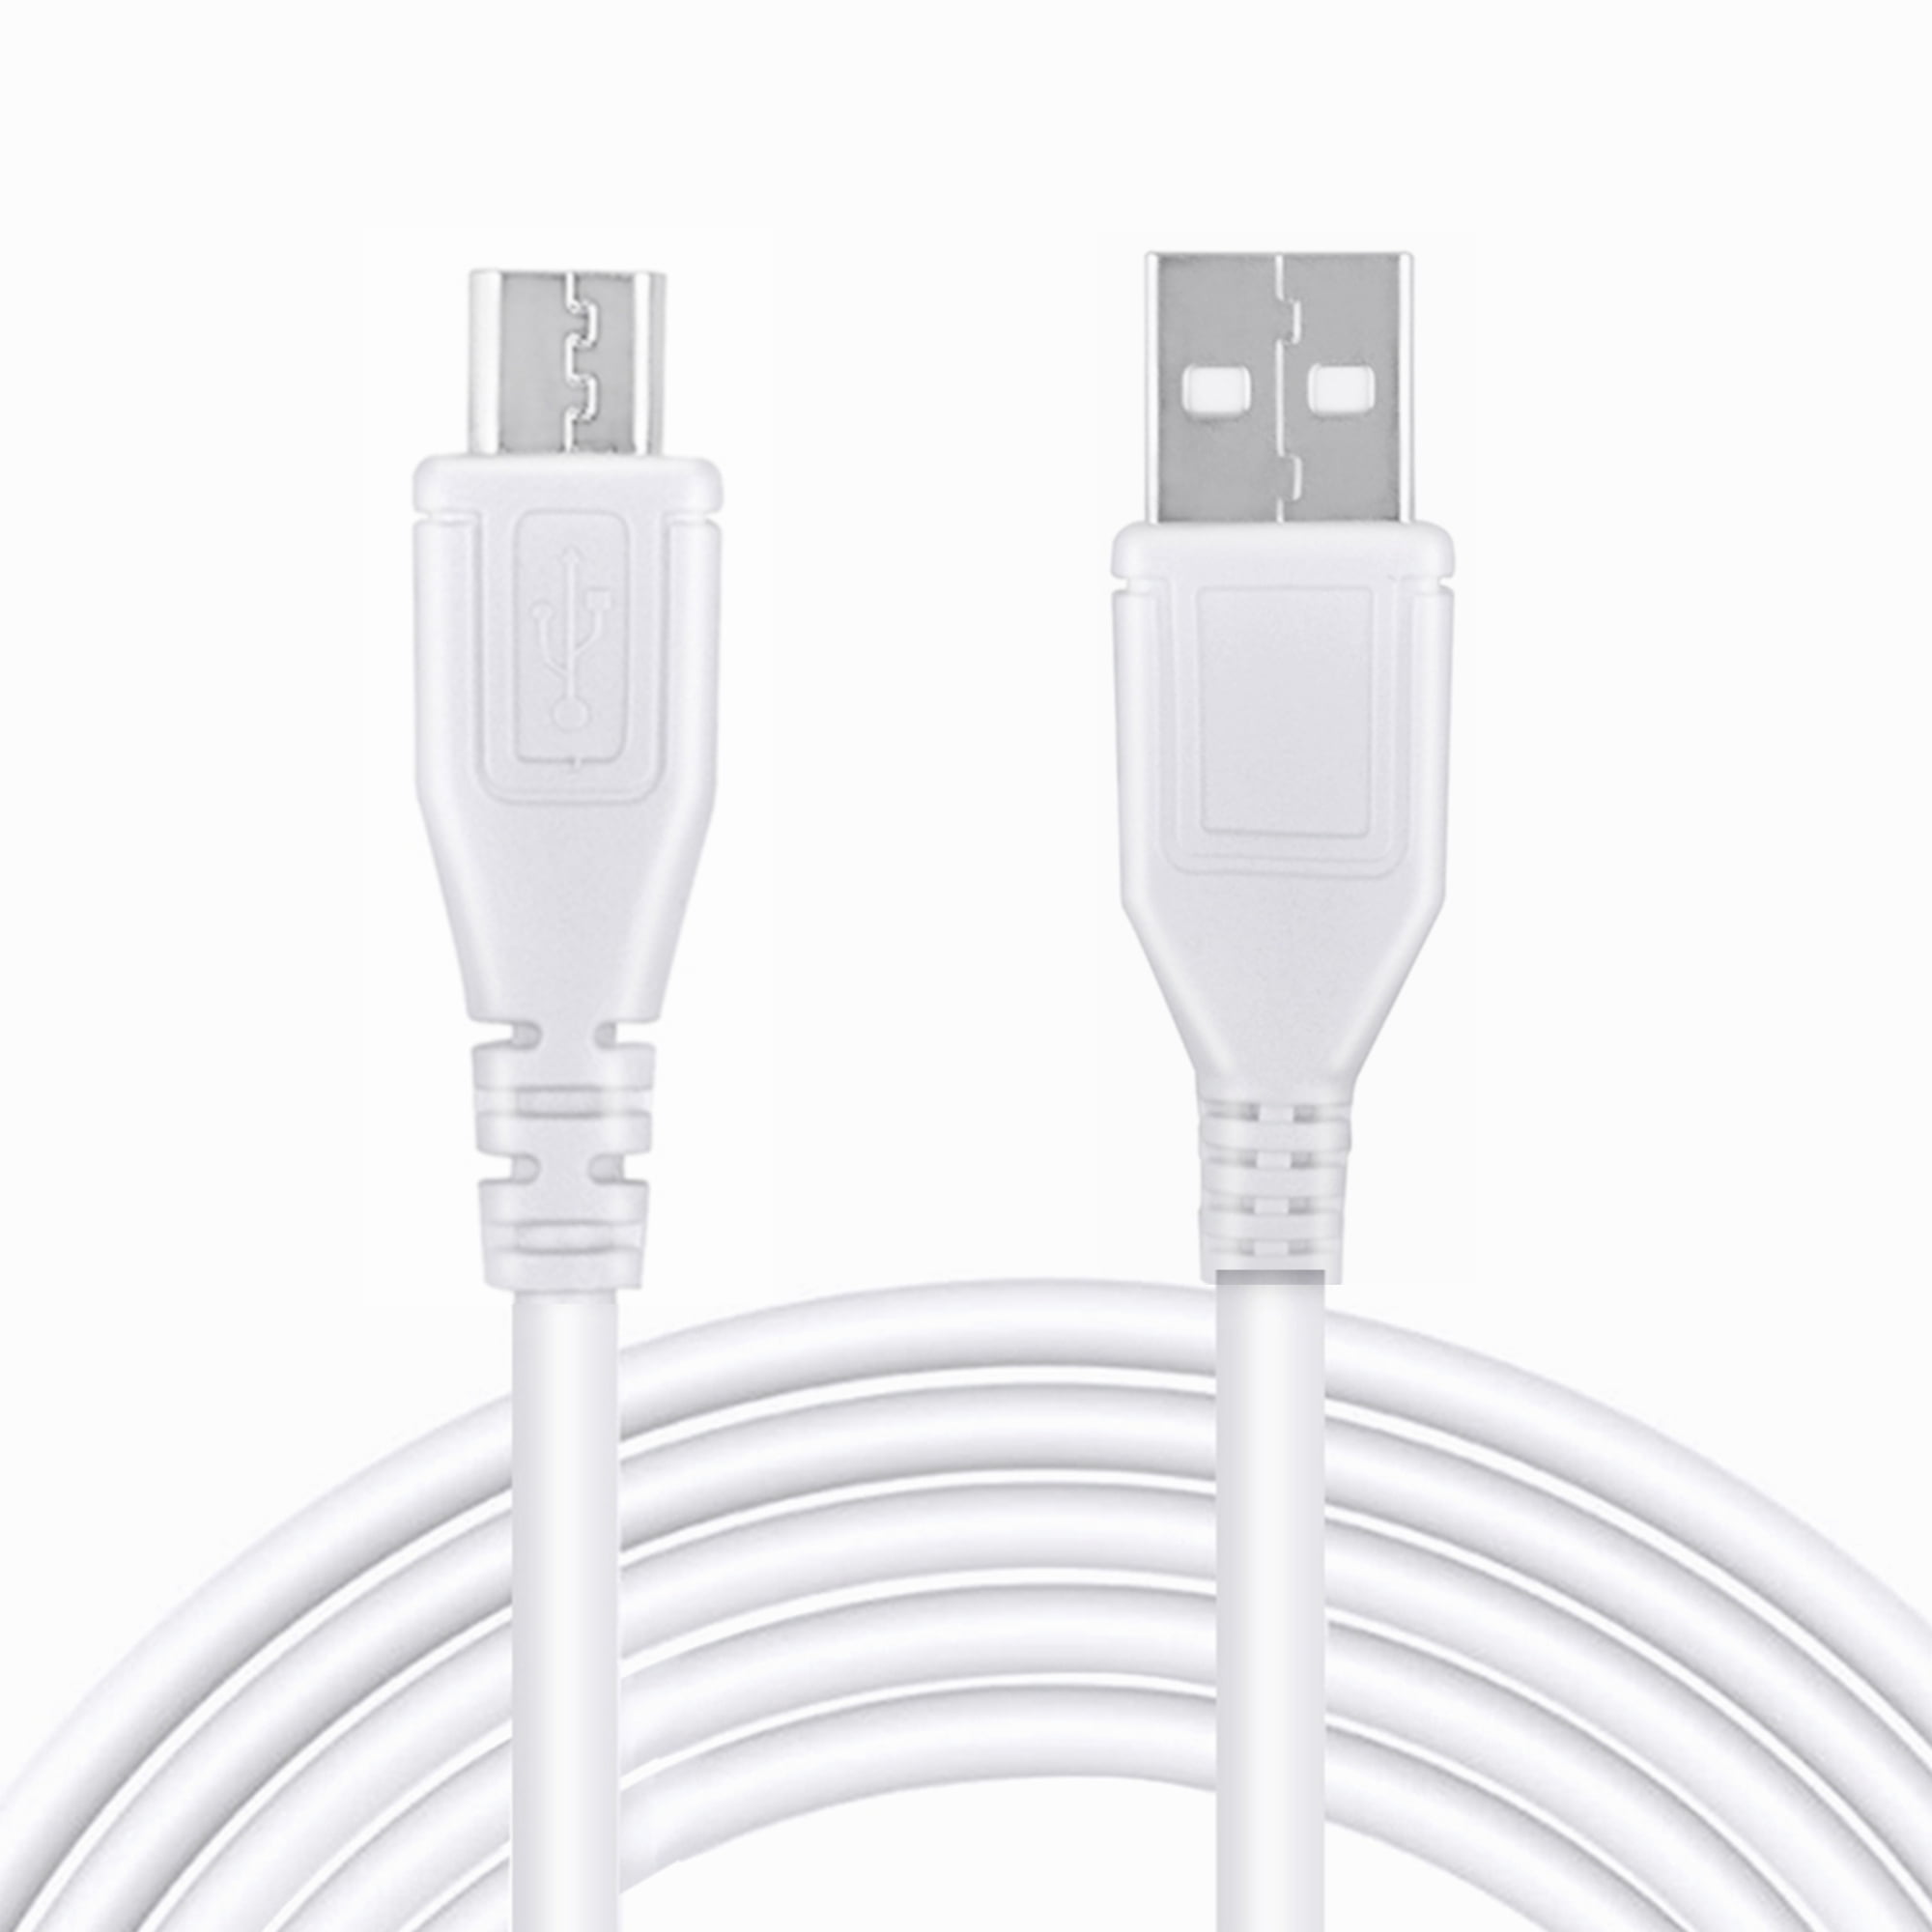 Fast Quick Charging MicroUSB Cable works with Samsung Galaxy Tab A 10.1 is 5ft/1.5M allows fast charging Speeds! 2016